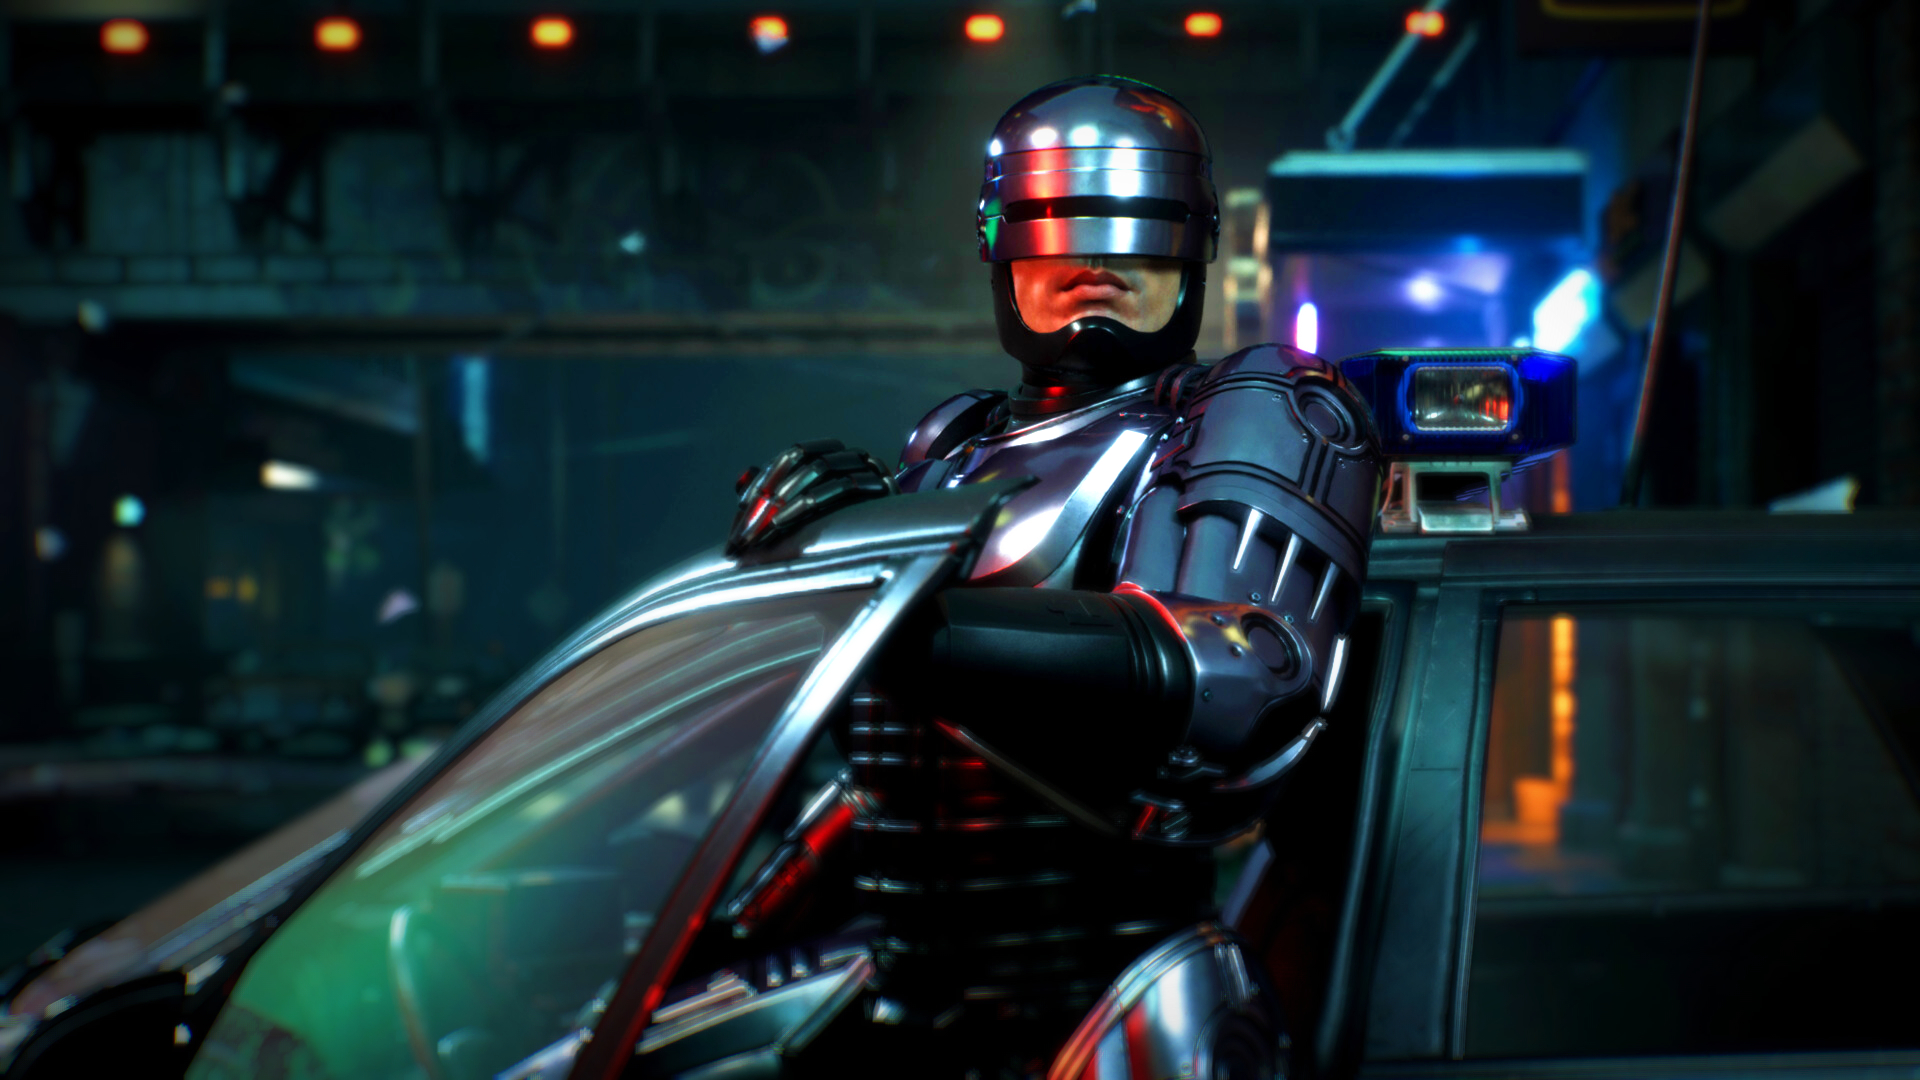 RoboCop FPS game gets a free Steam download